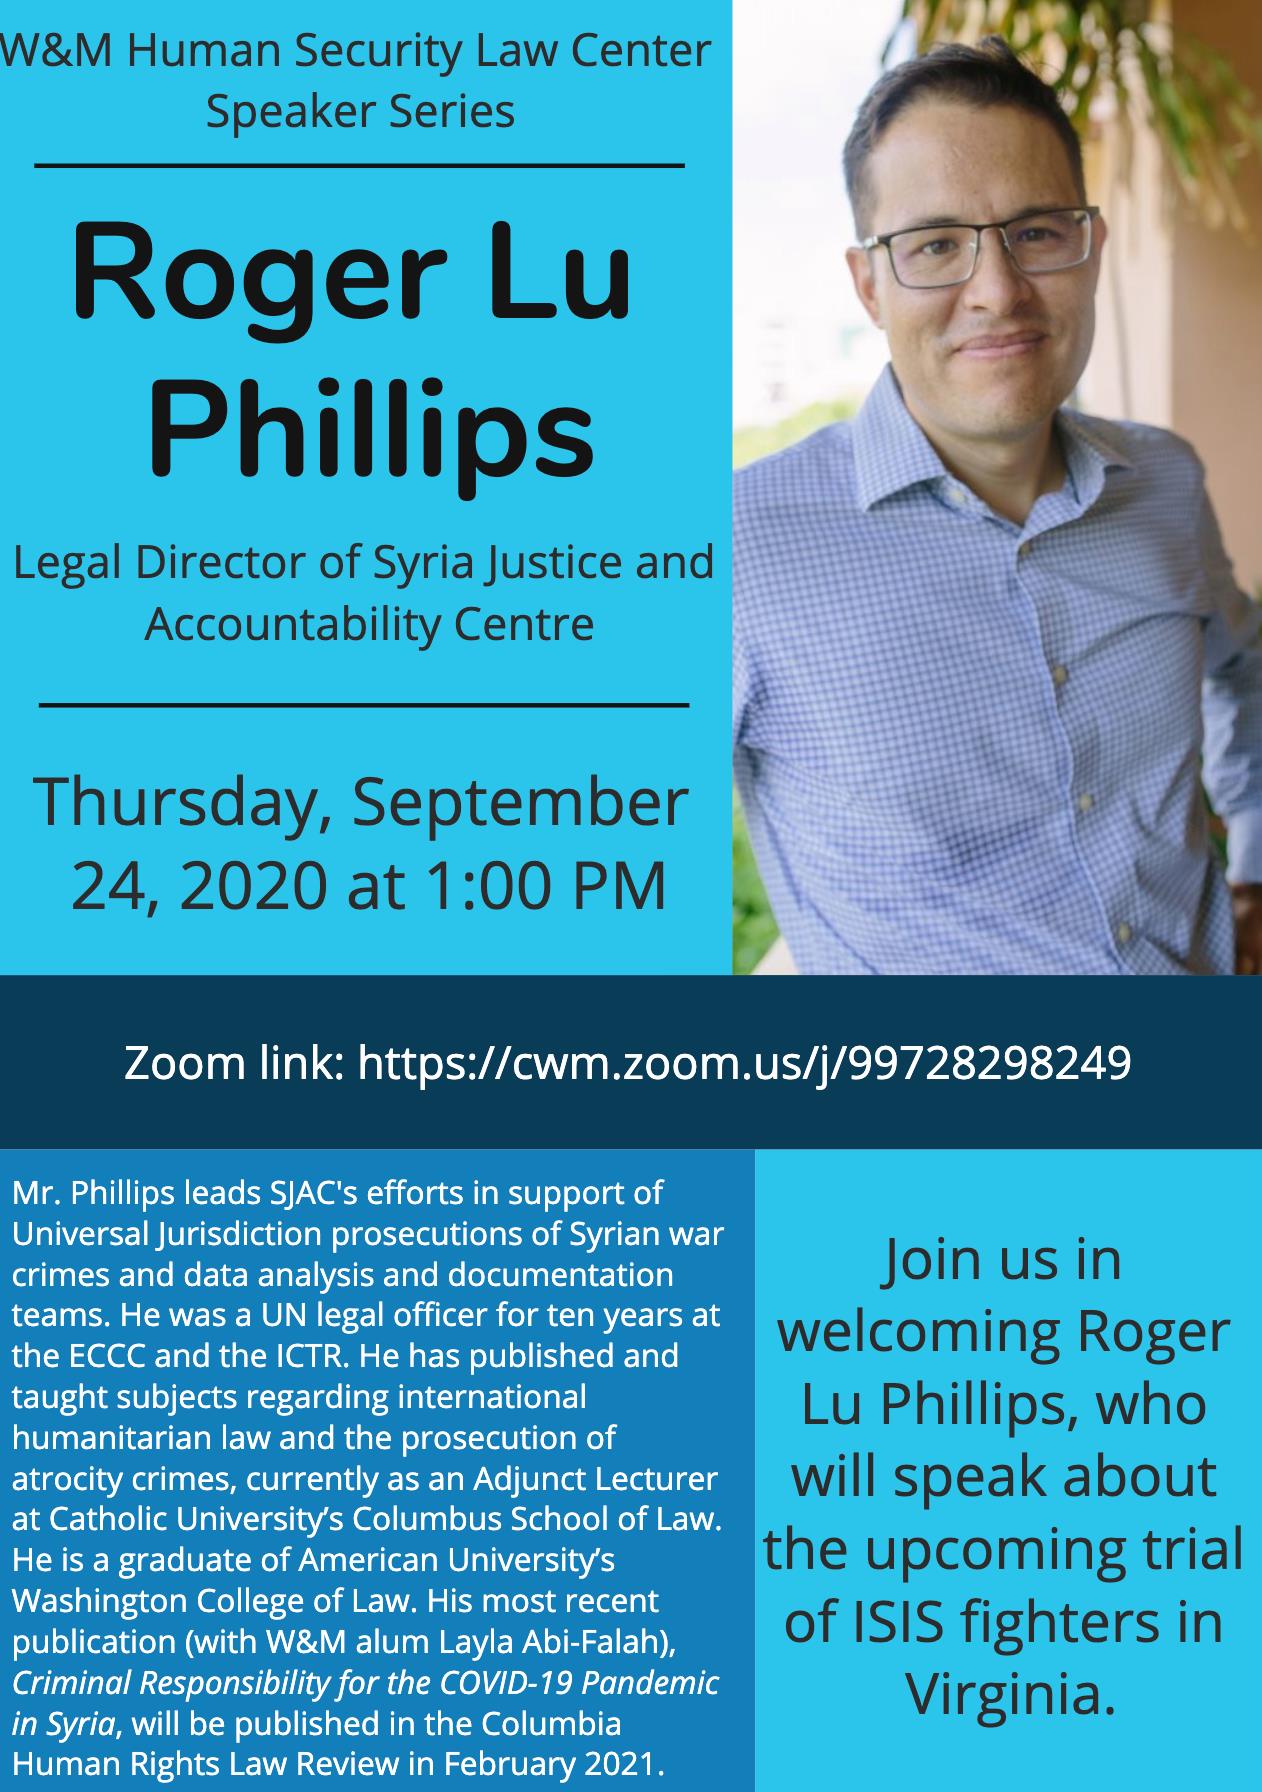 Image of a poster advertising Roger Lu Phillip's speaker series discussion on Syria Justice and Accountability